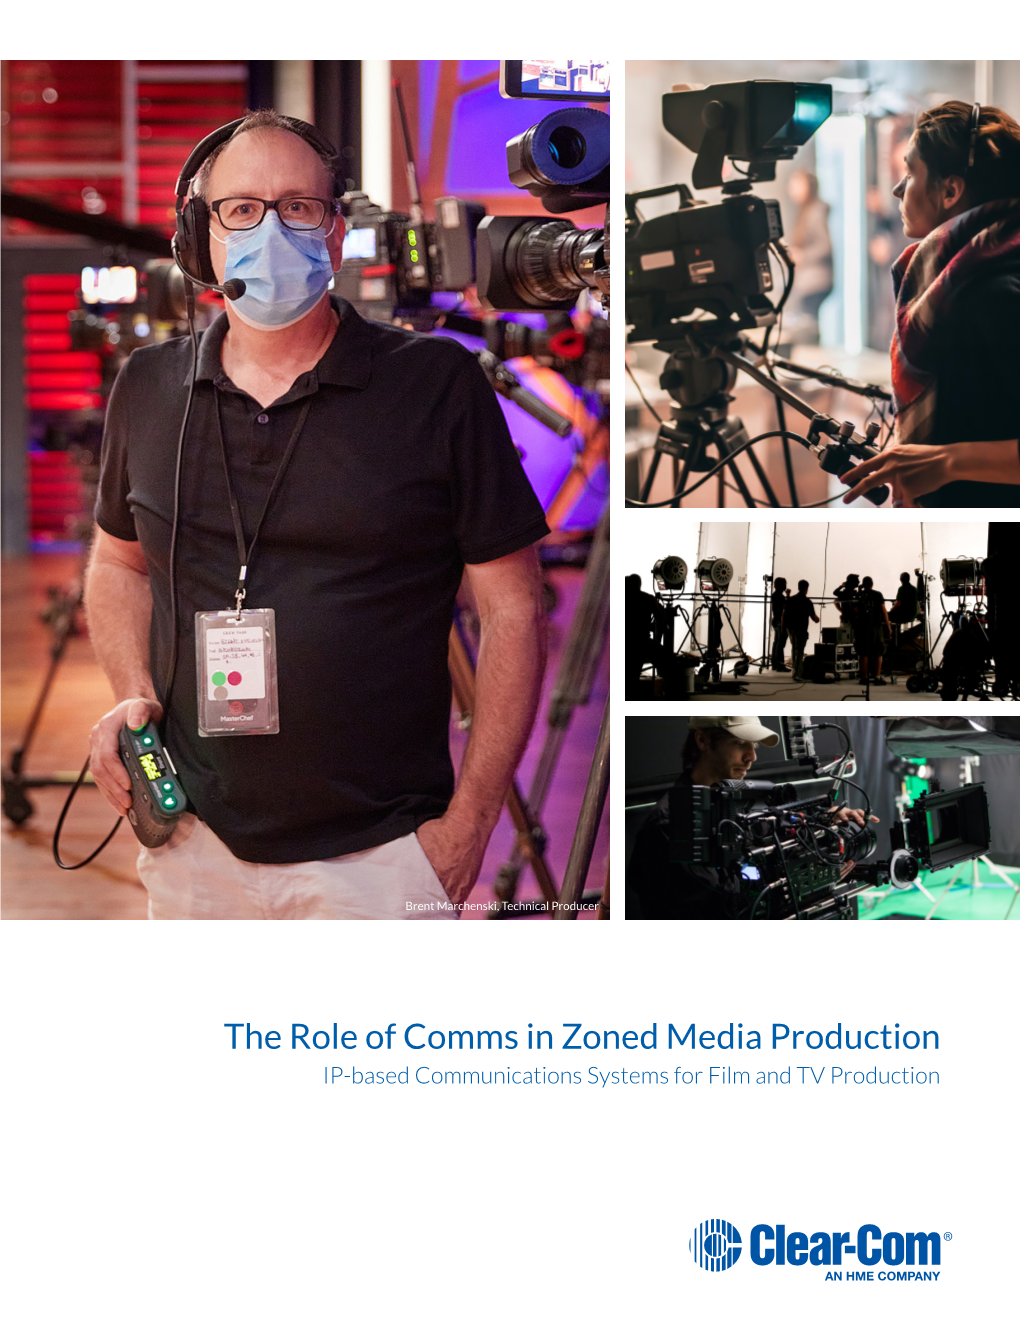 The Role of Comms in Zoned Media Production IP-Based Communications Systems for Film and TV Production Mihai Malaimare Jr, Cinematographer